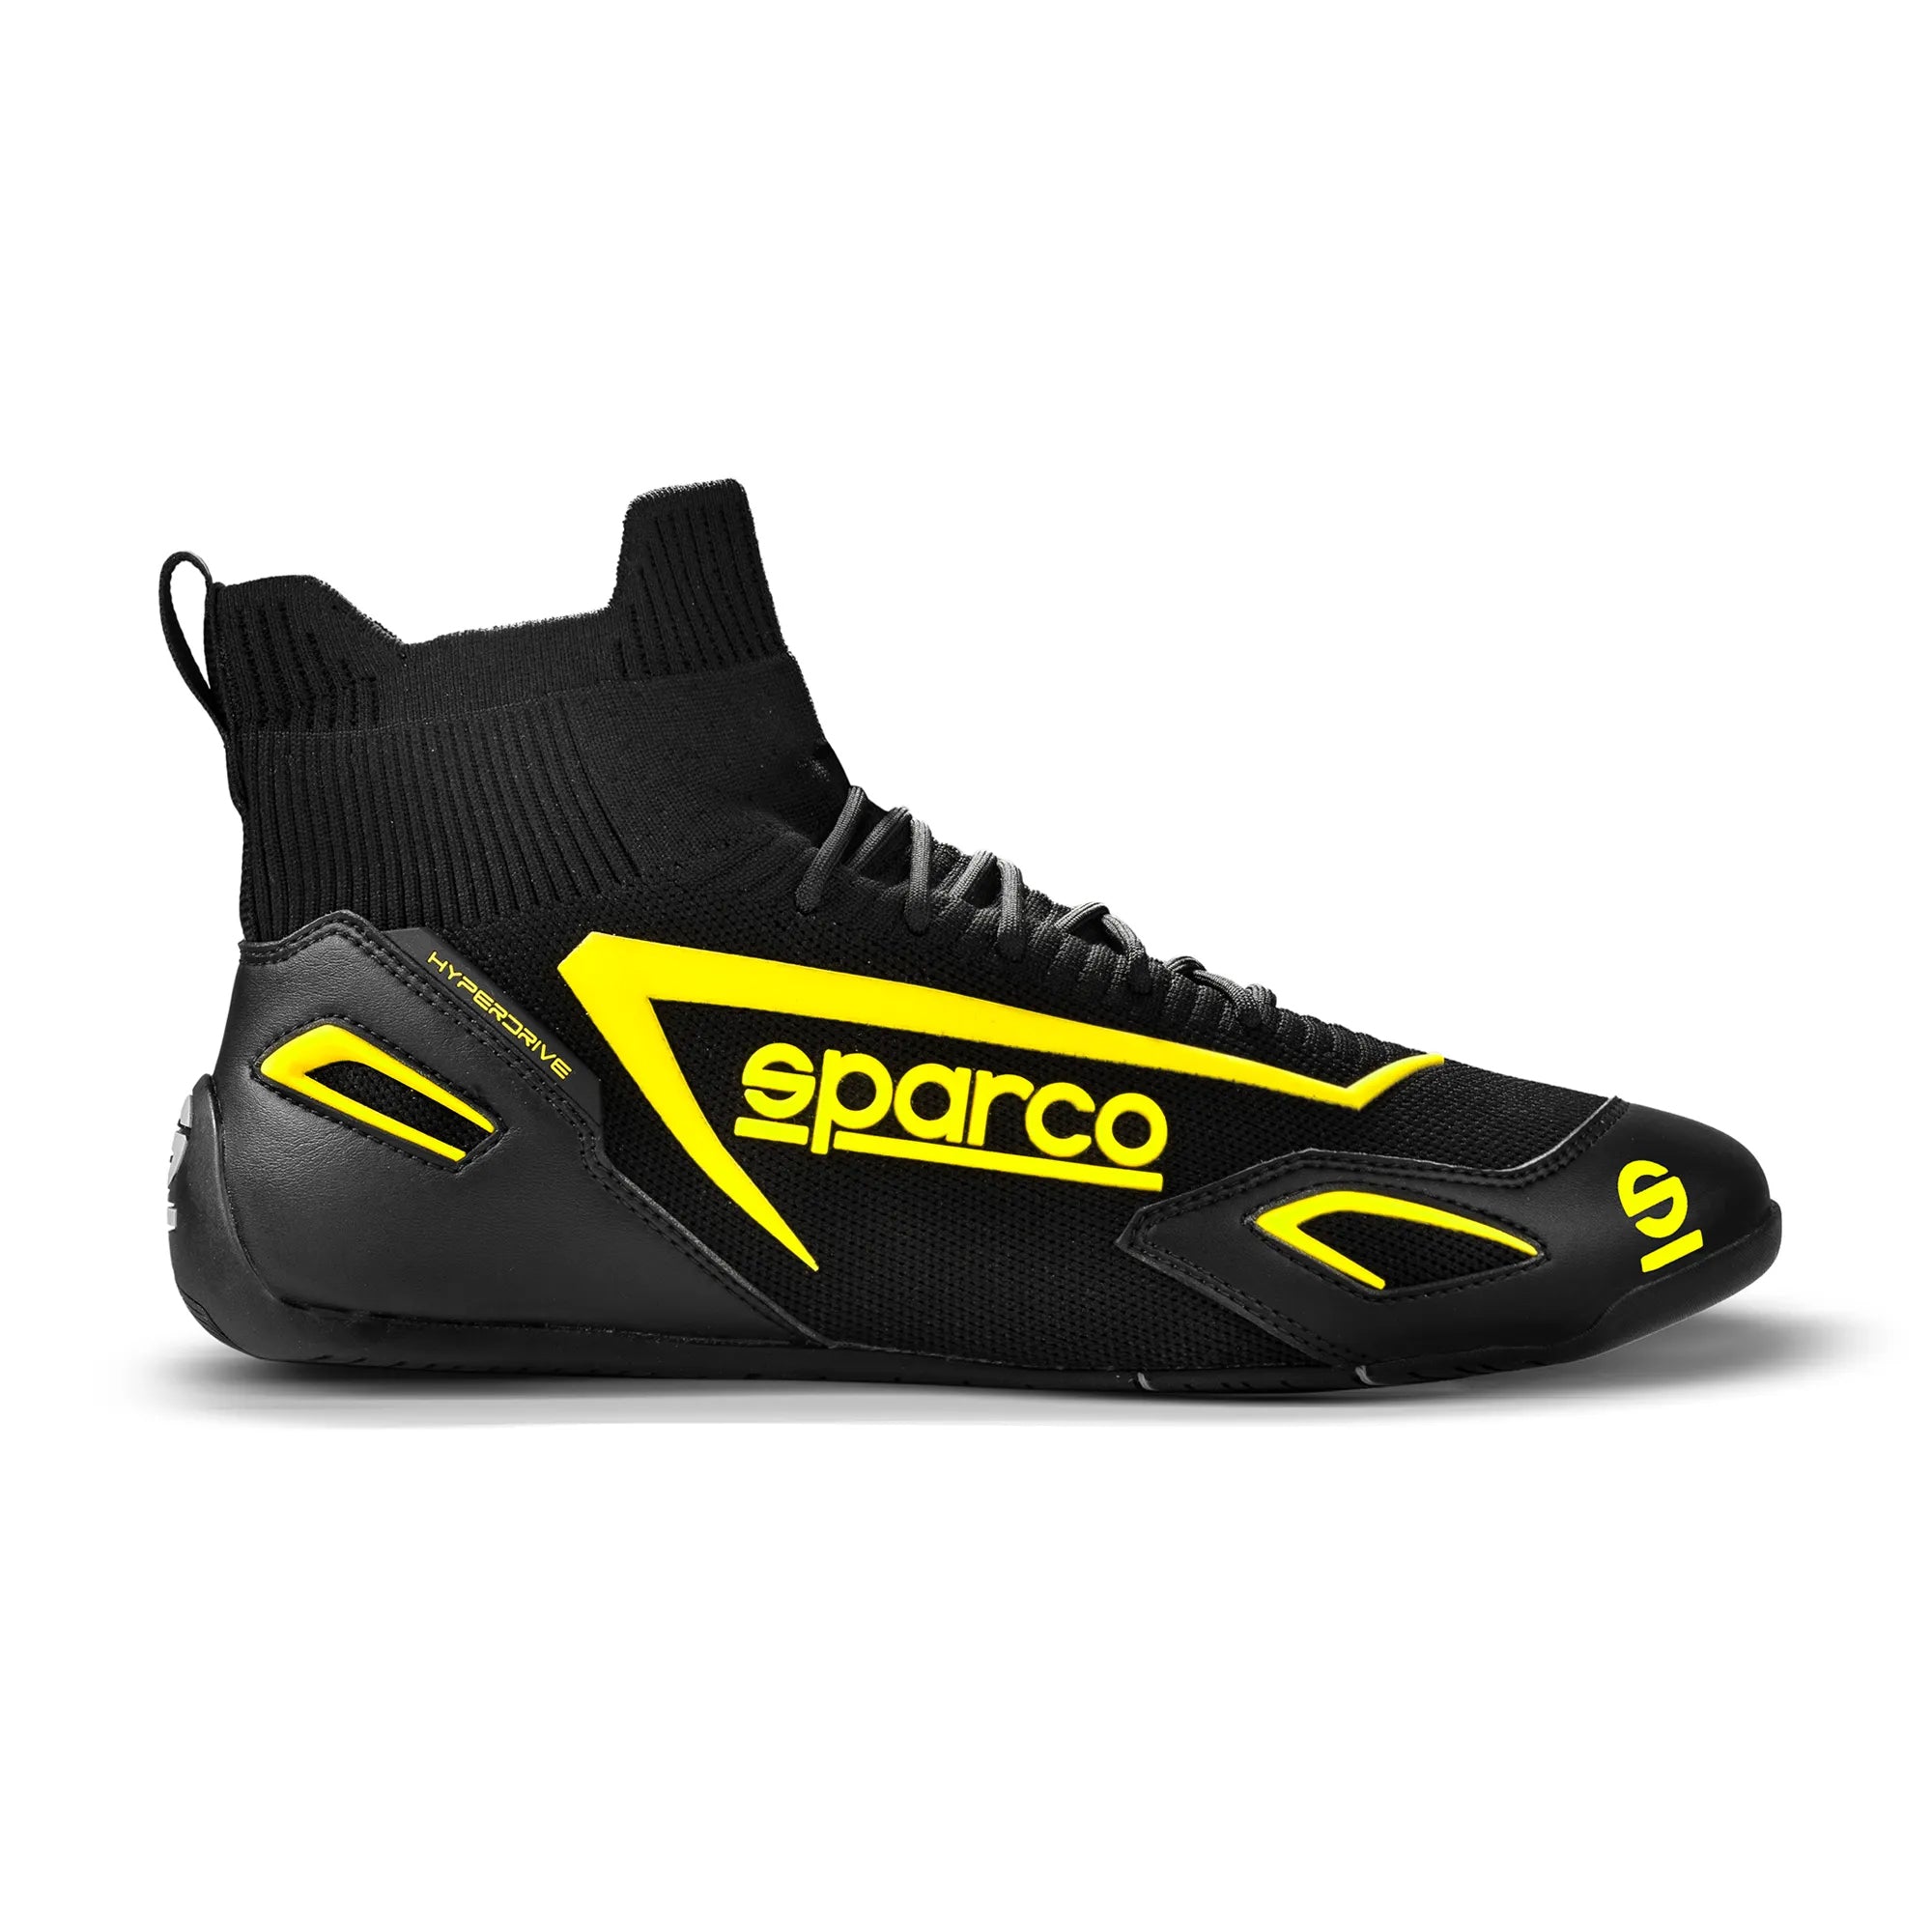 SPARCO 00129344NRGF Gaming sim racing shoes HYPERDRIVE, black/yellow, size 44 Photo-0 